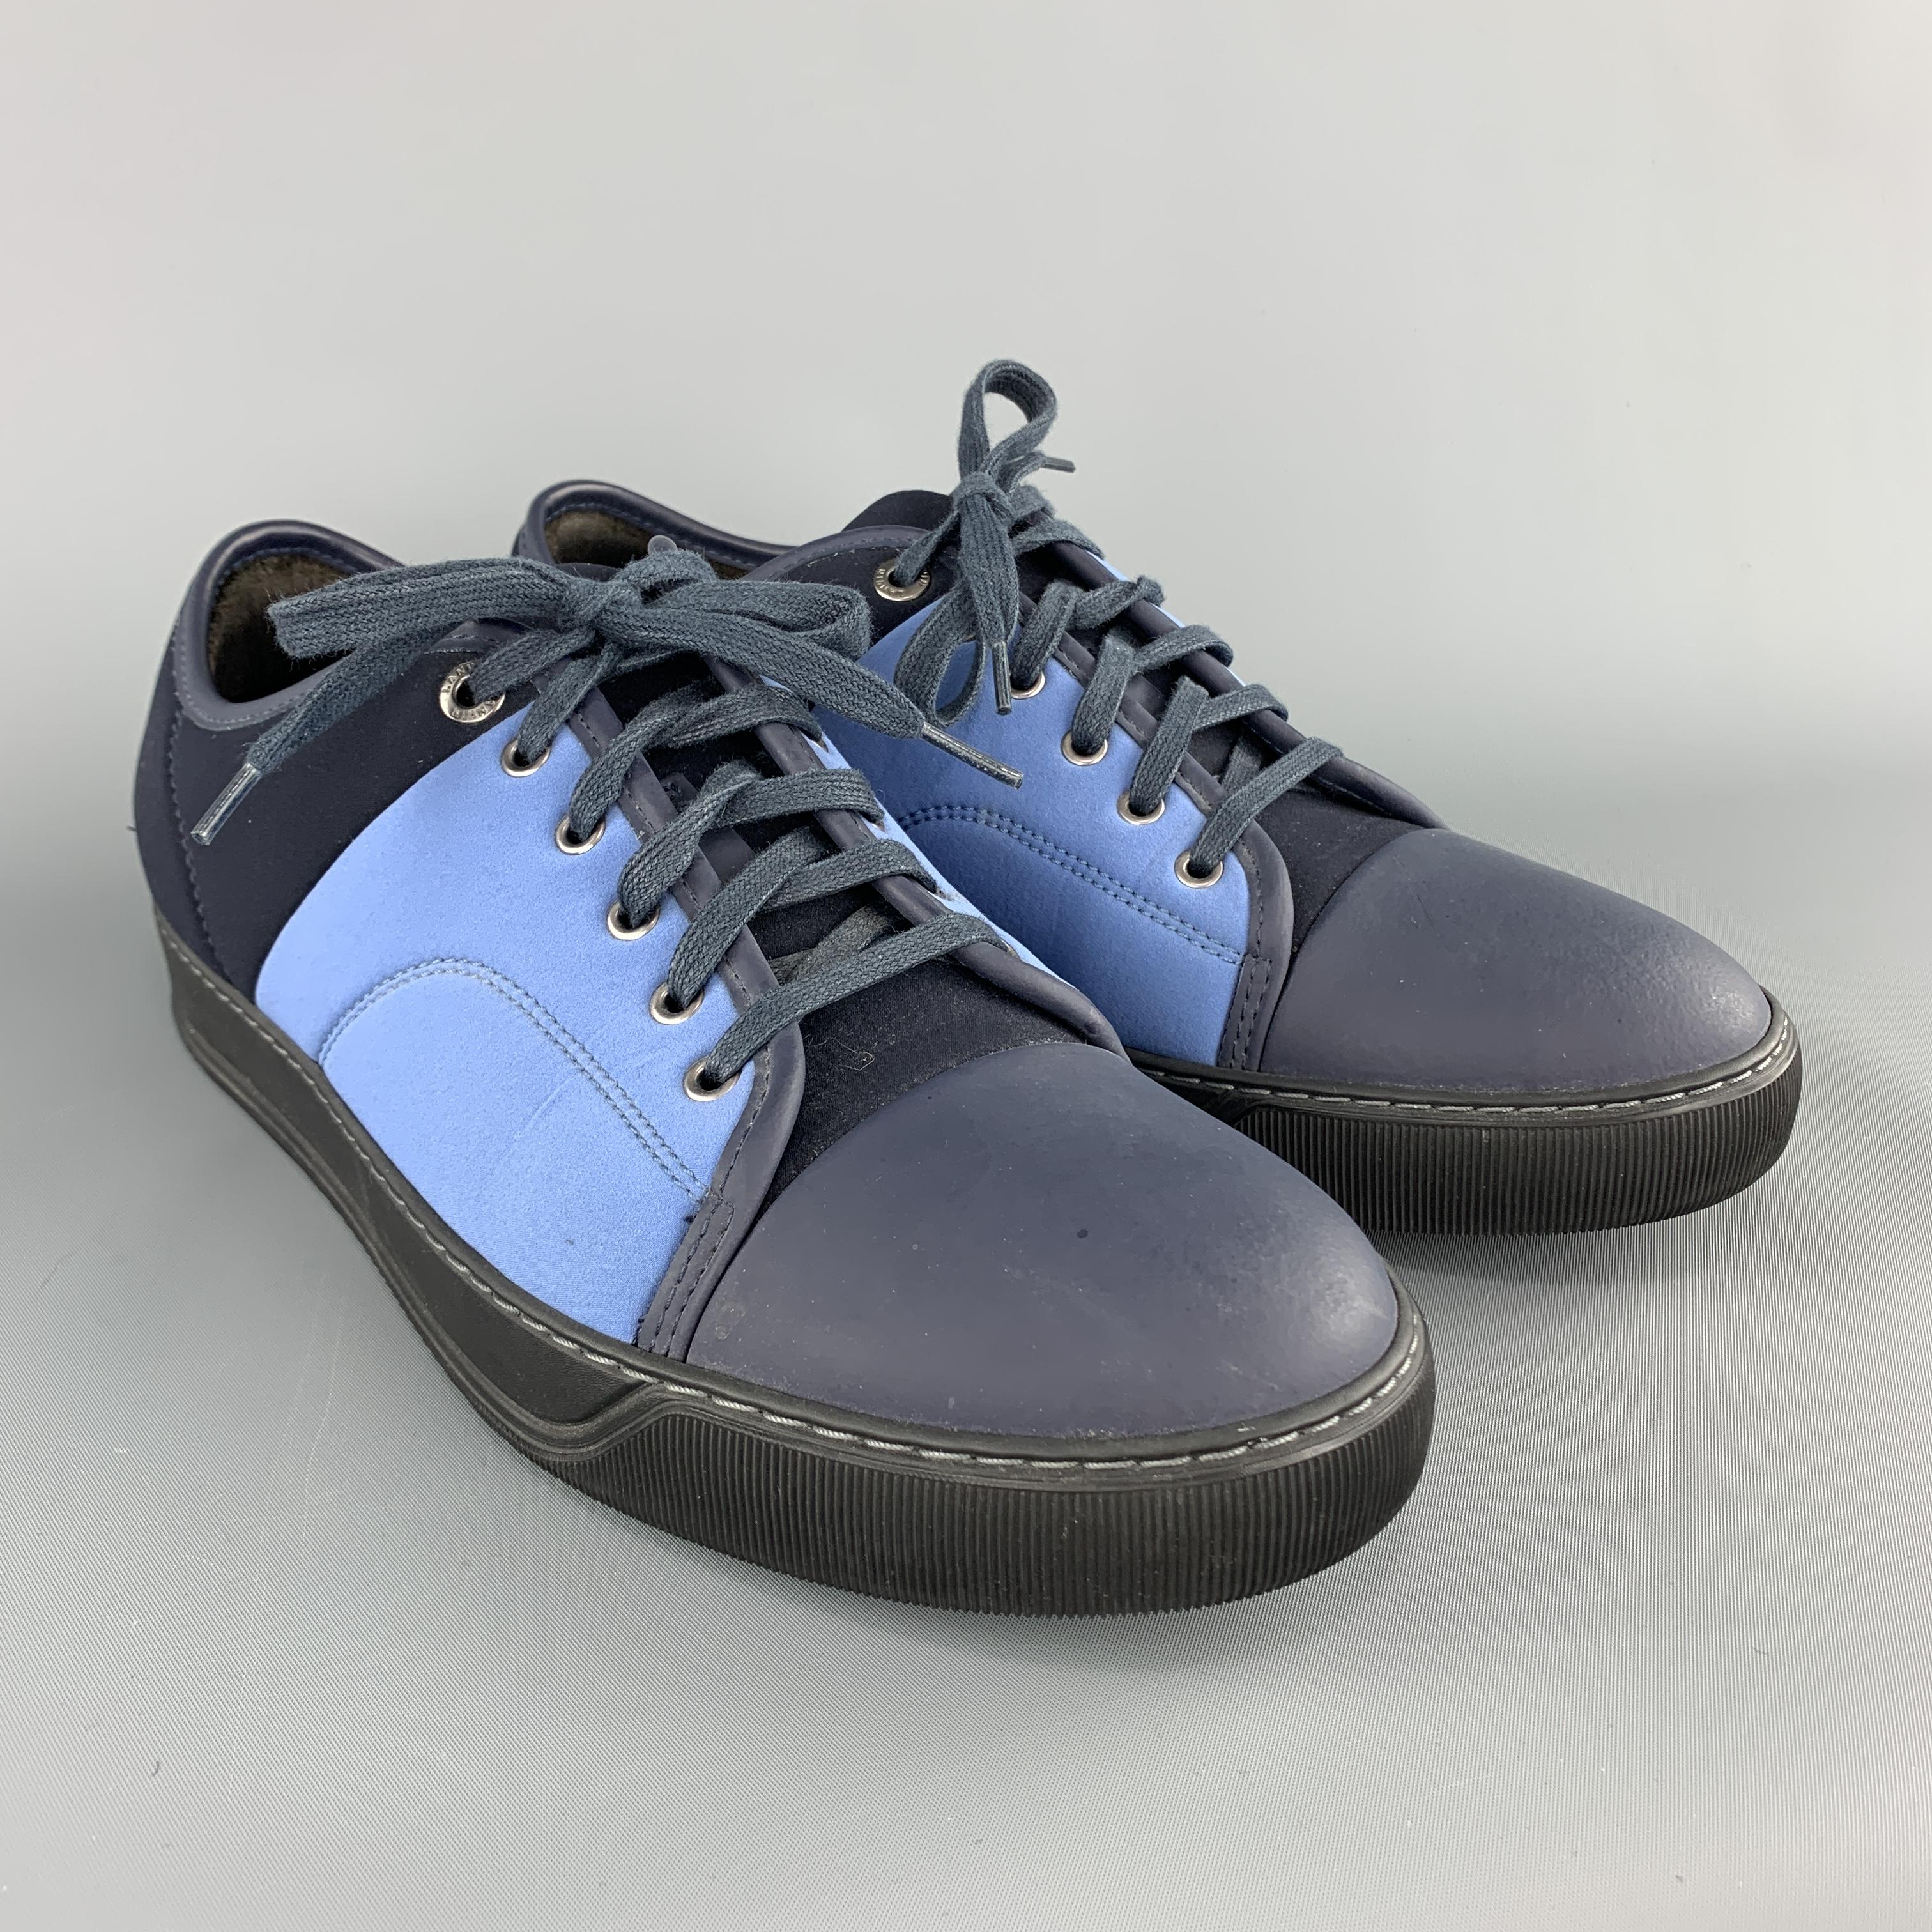 LANVIN low top sneakers come in navy neoprene with a rubber cap toe, lace up front, and blue side panels. Made in Portugal.

Very Good Pre-Owned Condition.
Marked: UK 9

Outsole: 12 x 4.5 in.